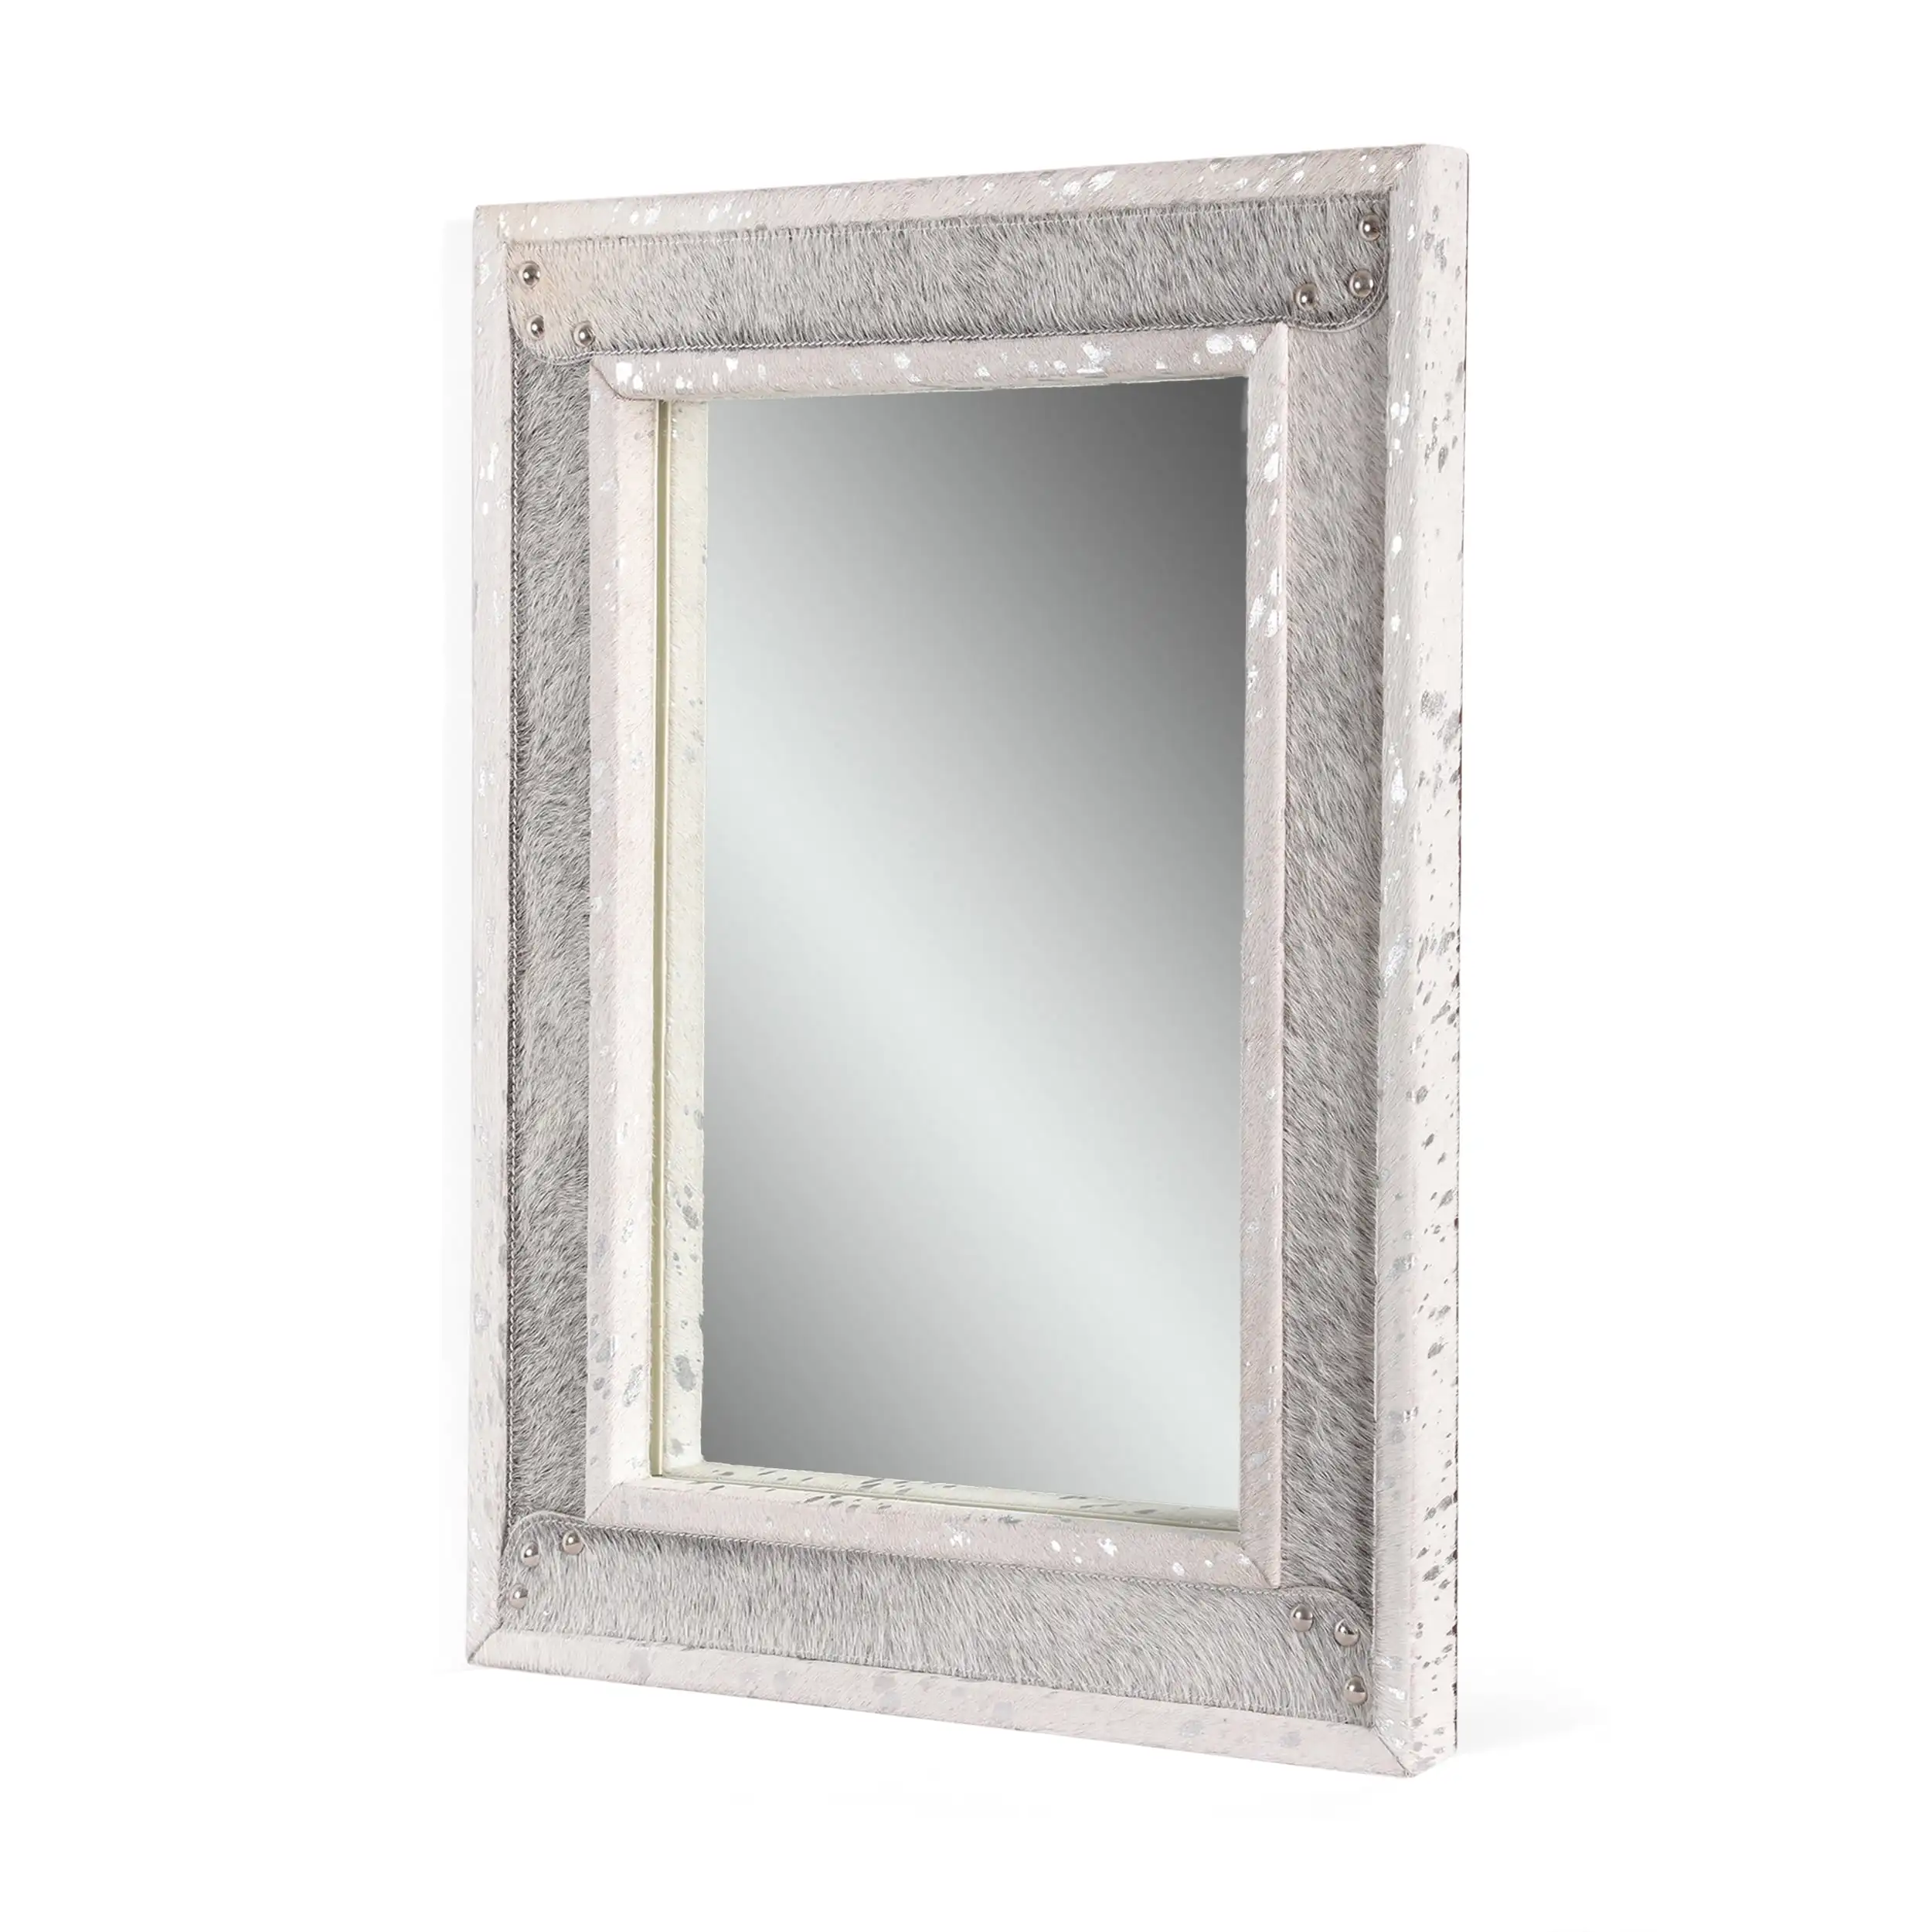 

Luxurious Refined Fashionable and Elegant Leather Studded Rectangular Wall Mirror Gray and Silver